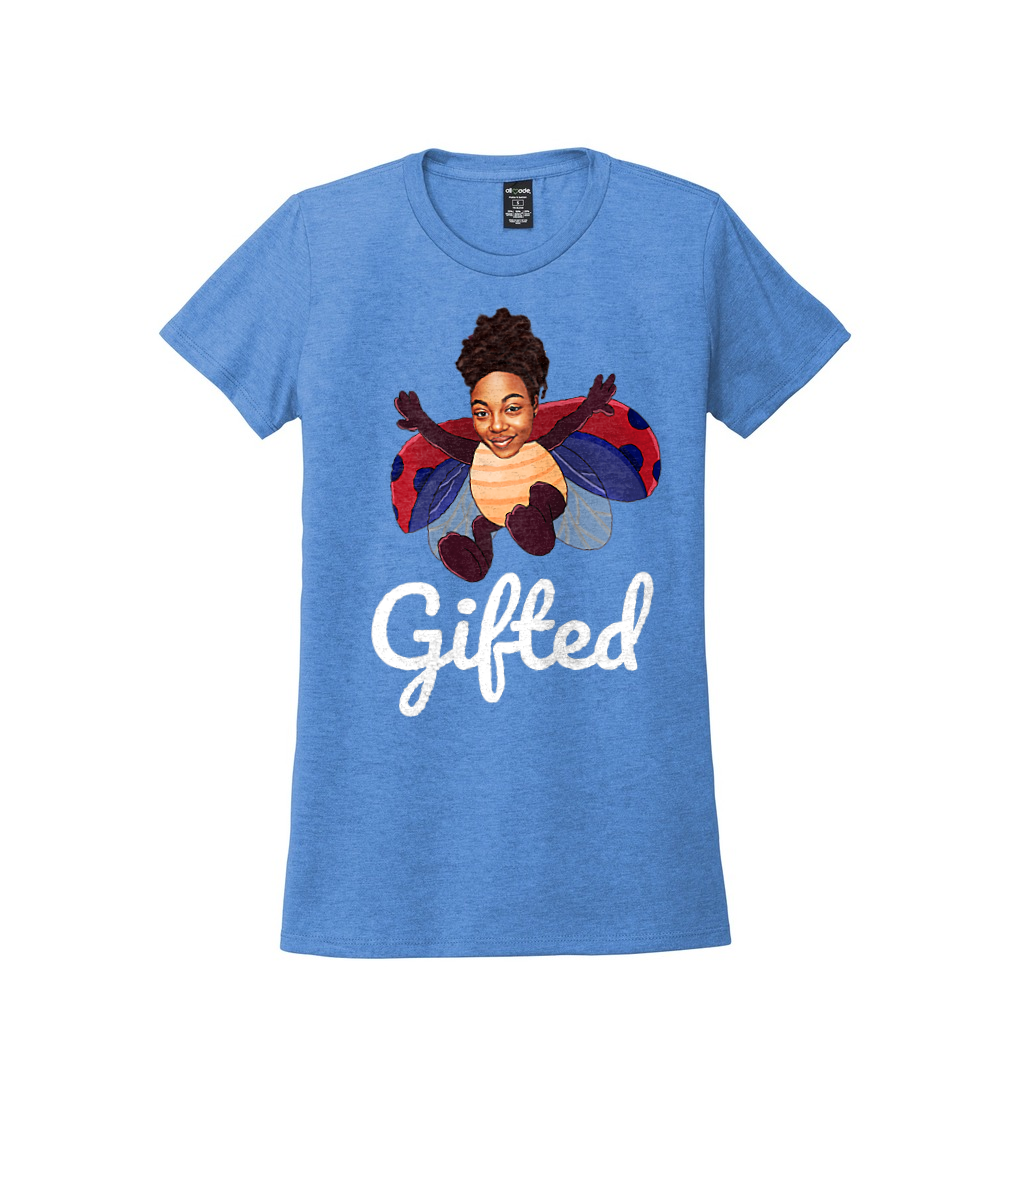 Gifted by Brit Women’s Tri-Blend Tee or Similar